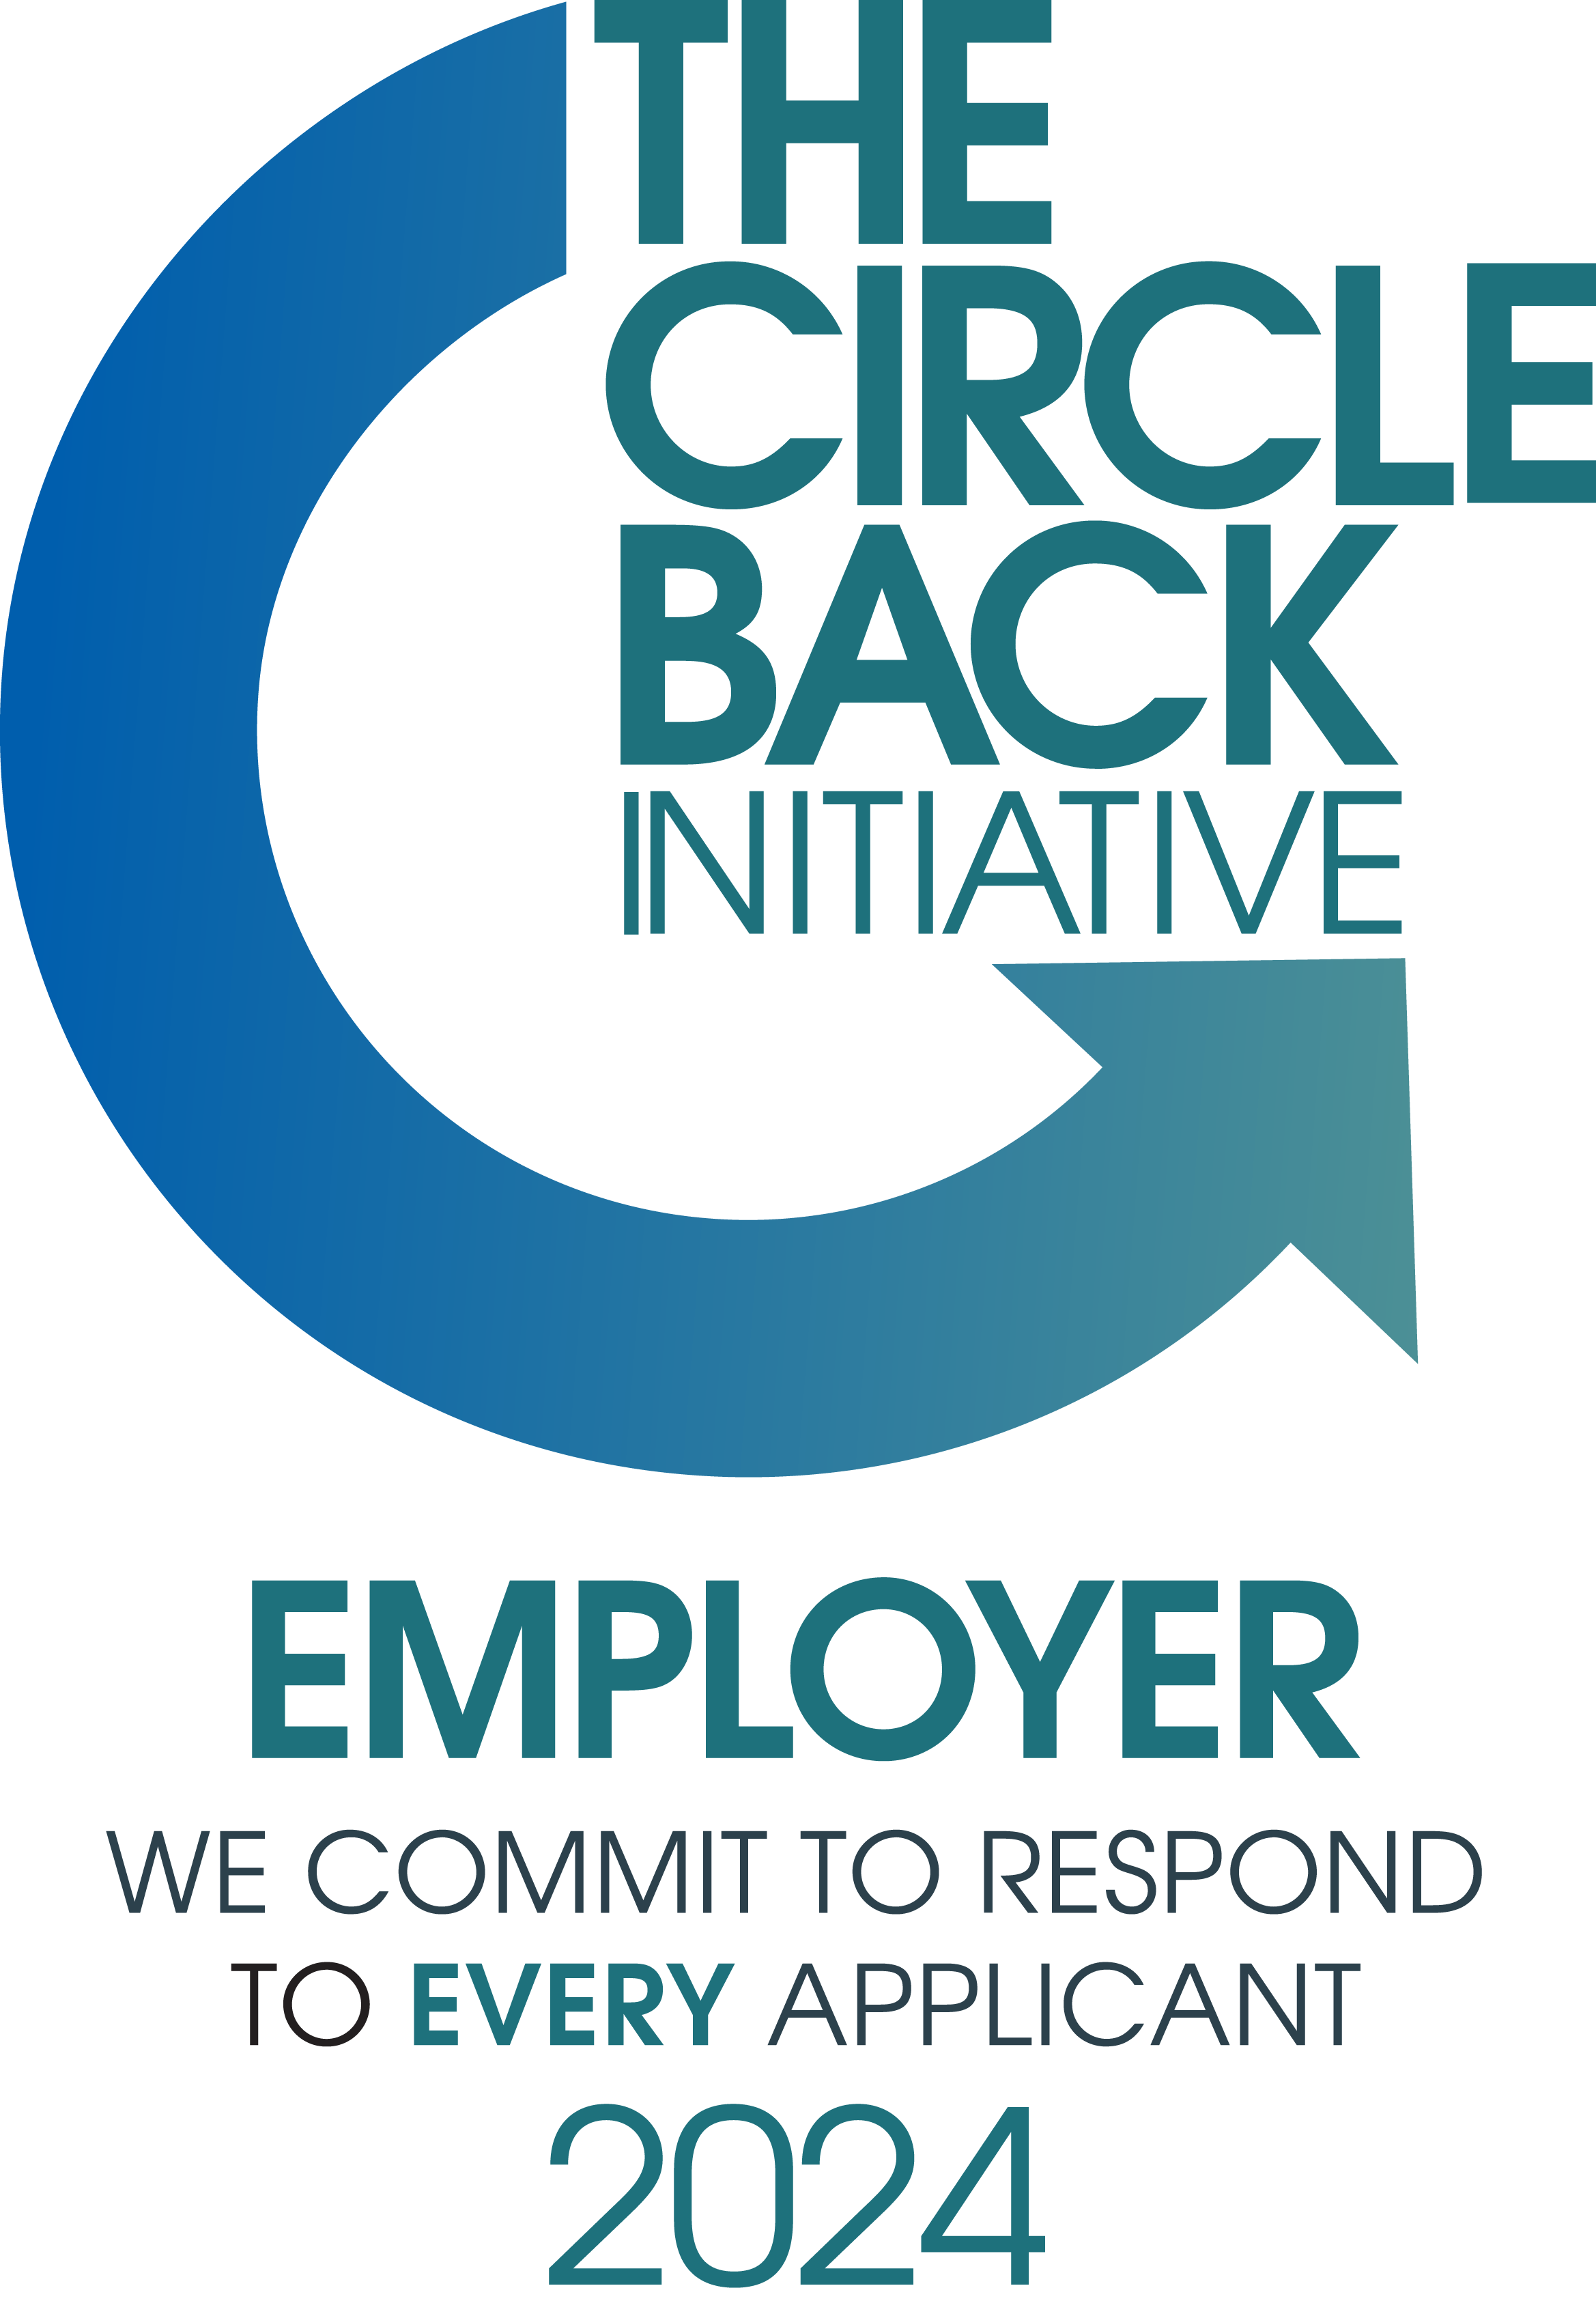 Badge certifying Mission Australia as a Circle Back Initiative employer. This designation highlights the commitment to improving candidate communication by responding to all applicants during the recruitment process.